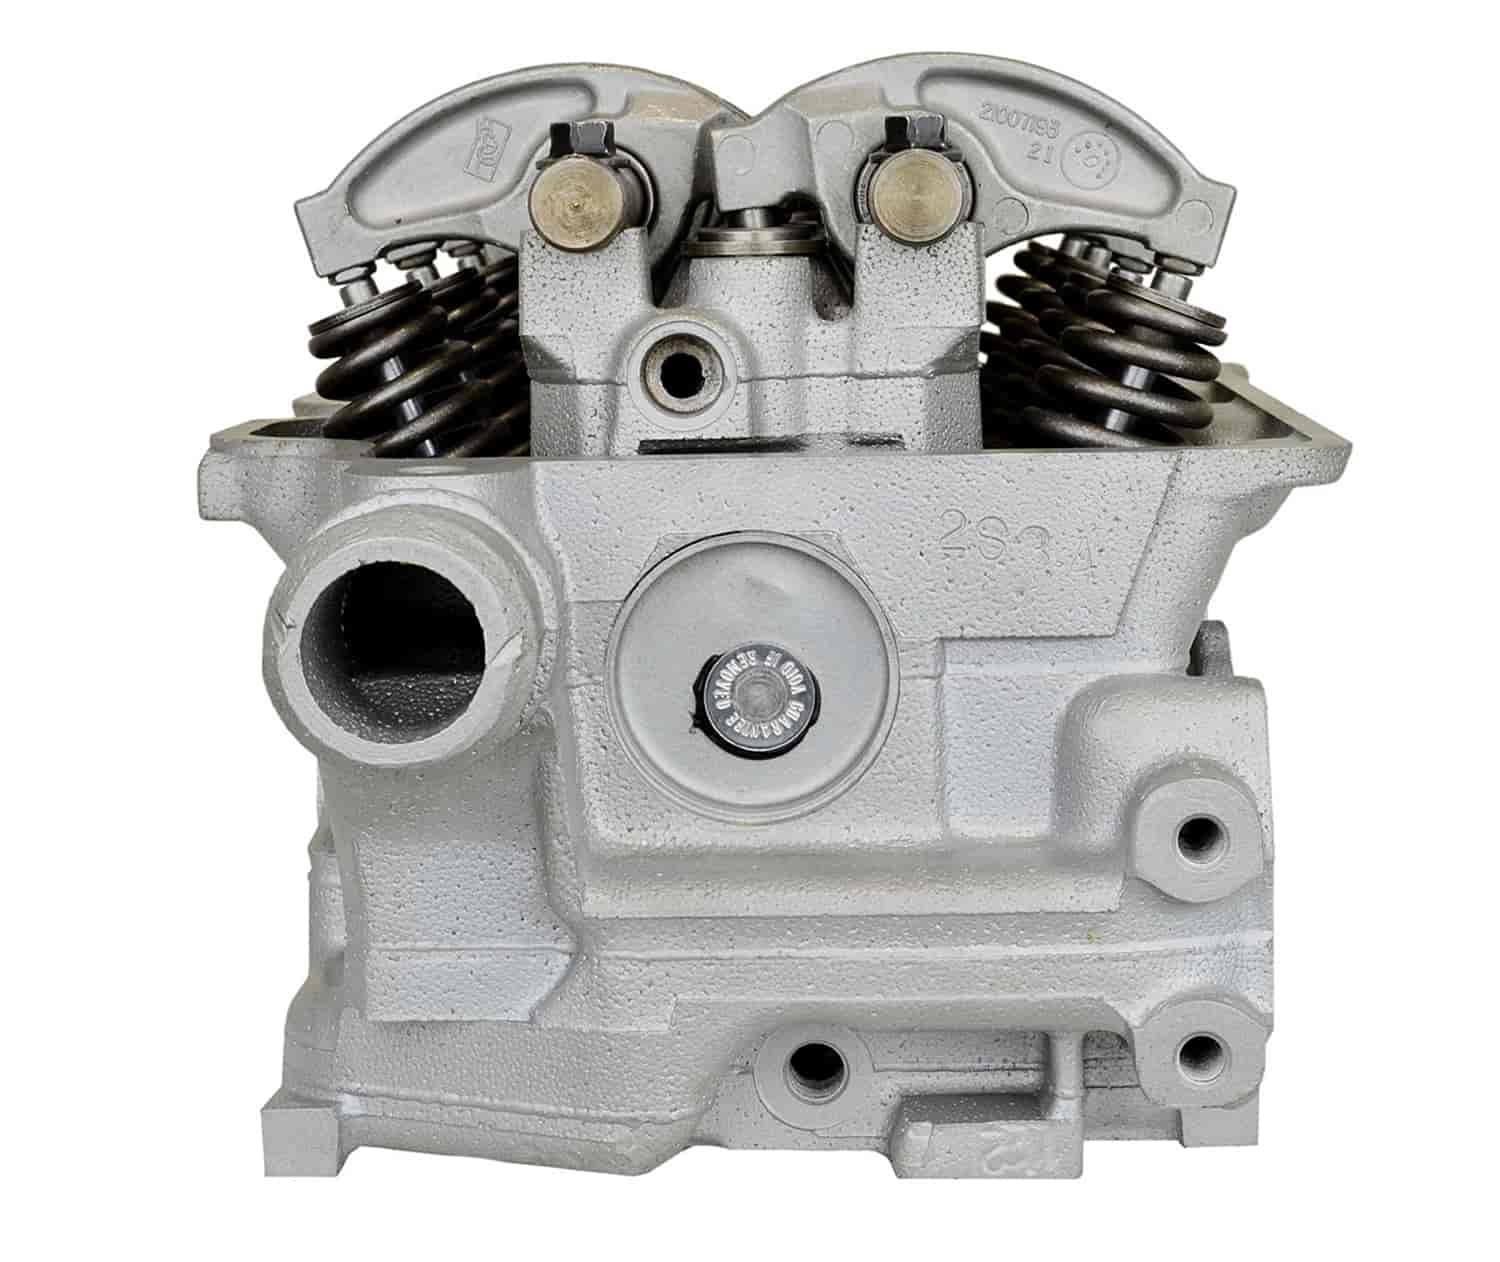 Remanufactured Cylinder Head for 2000-2002 Saturn with SOHC 1.9L L4